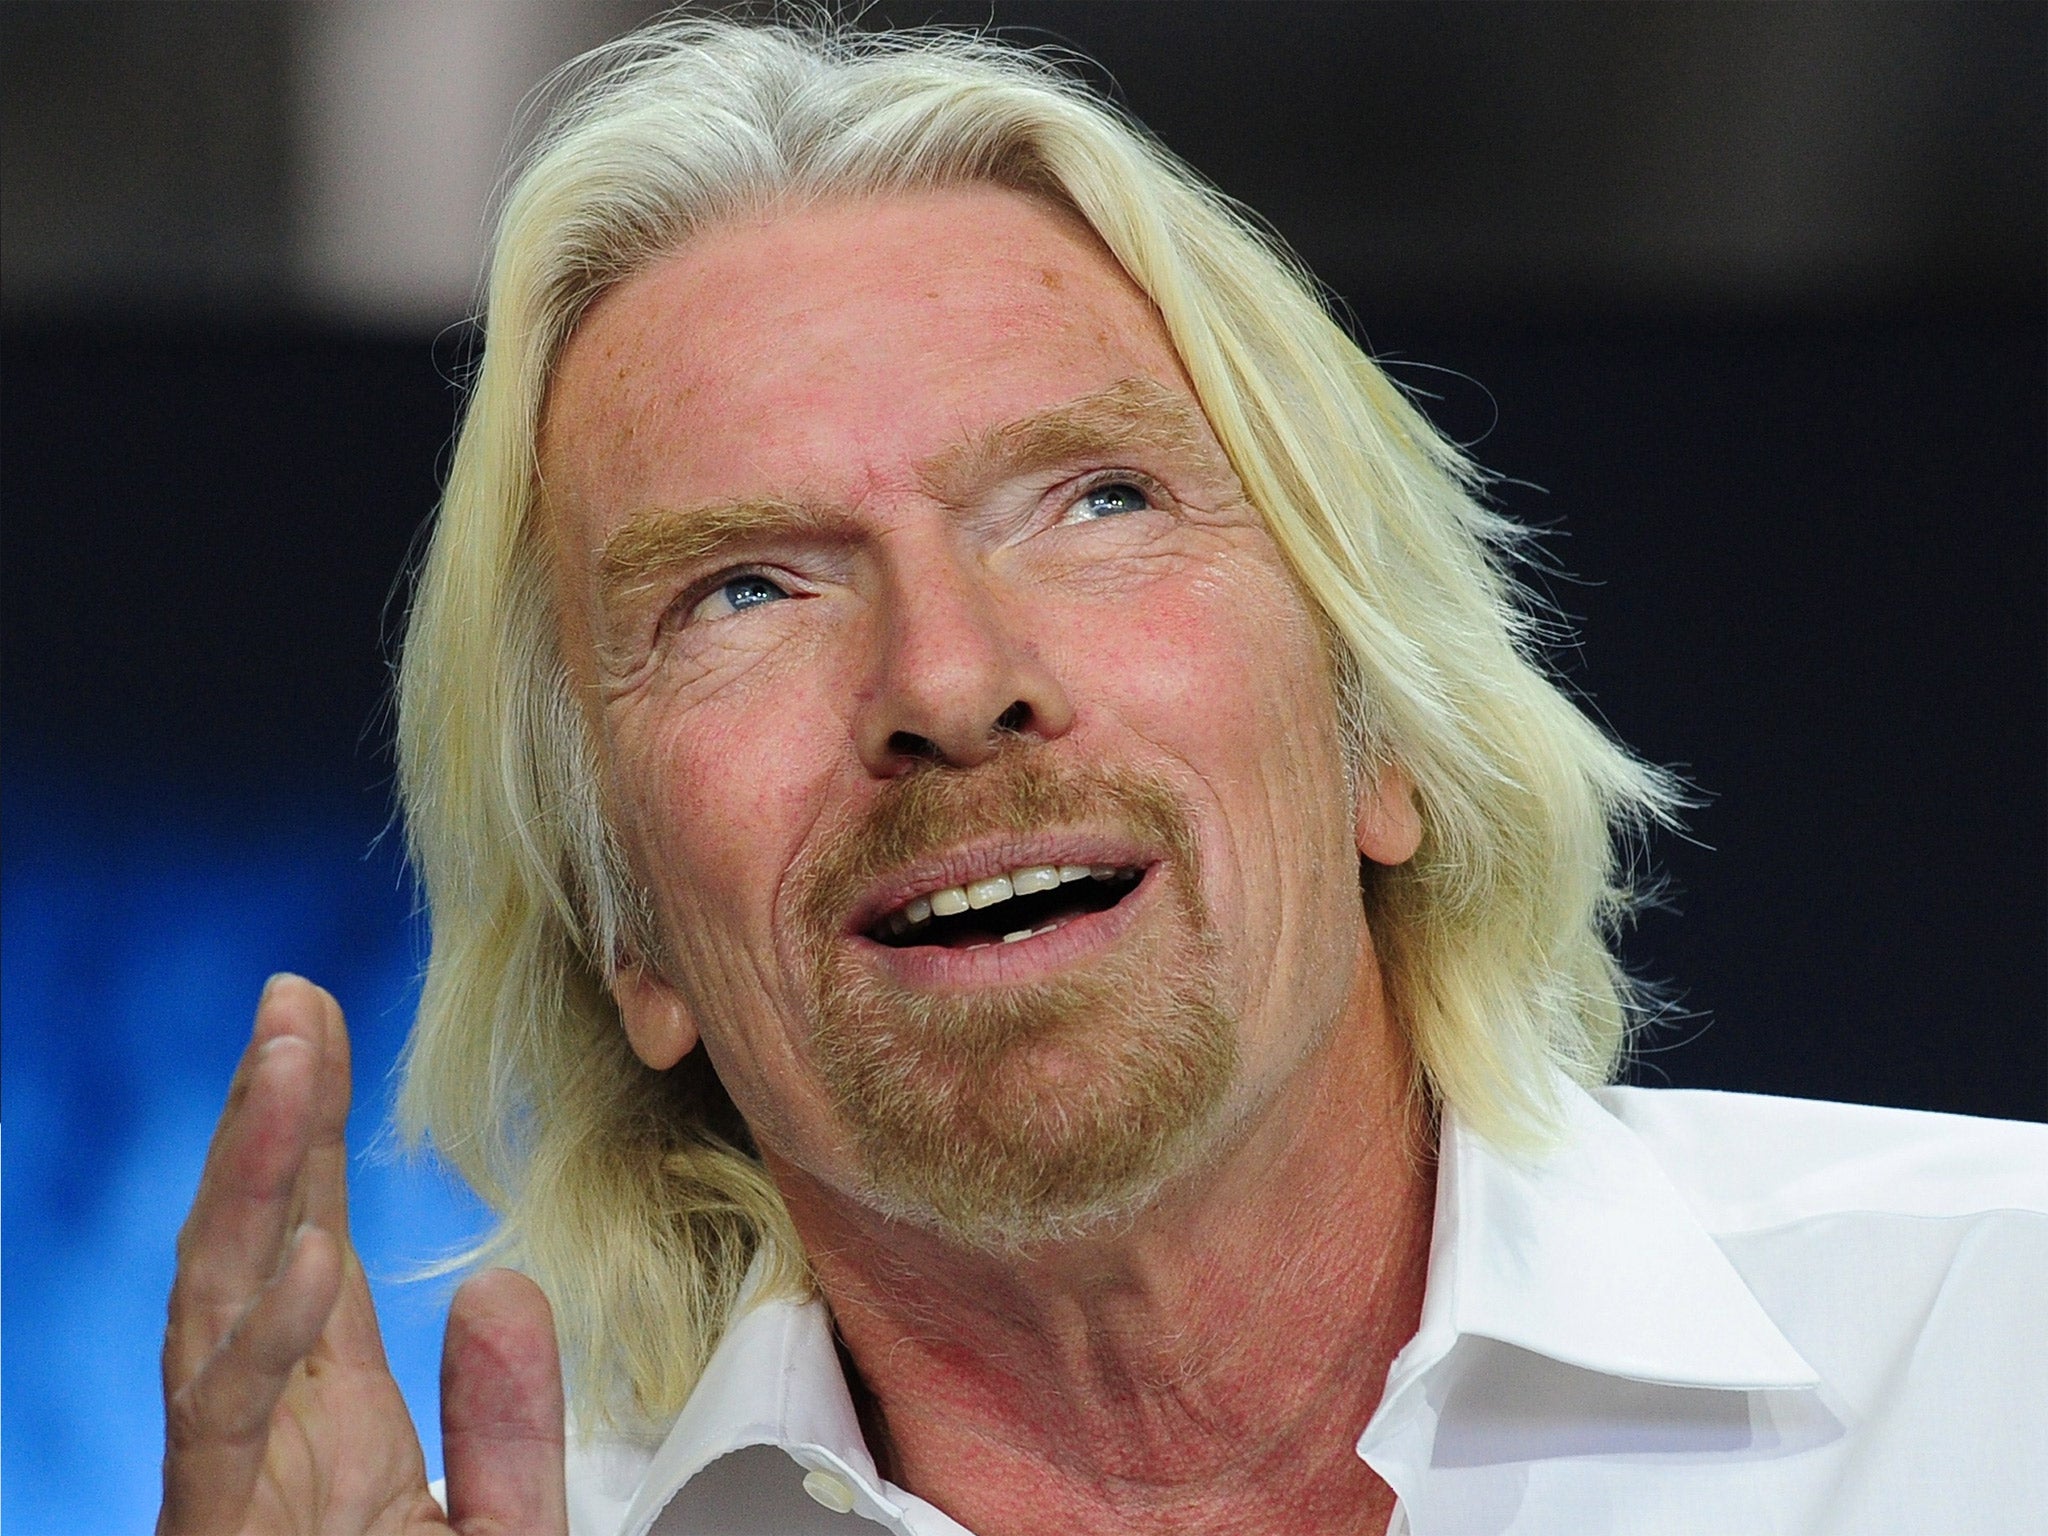 Sir Richard Branson expressed interest in Wireless Armour’s ‘intriguing’ product